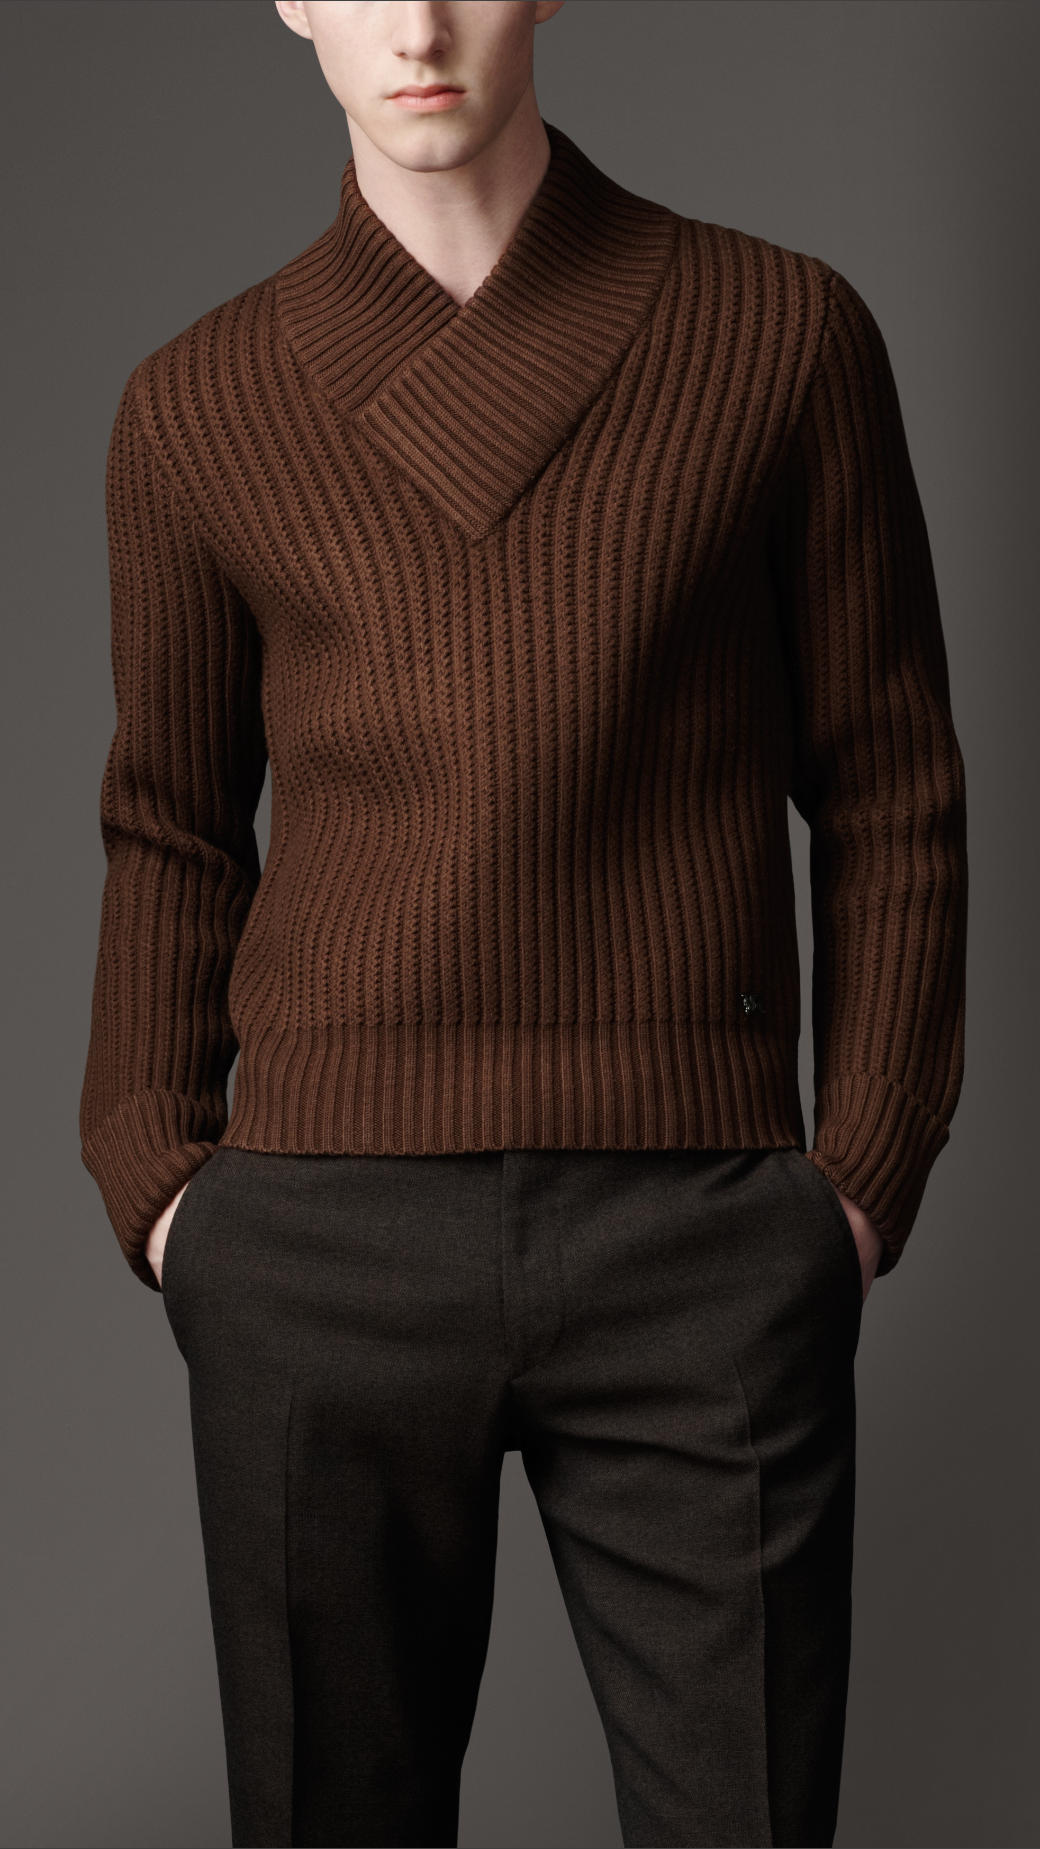 Lyst - Burberry Shawl Collar Sweater in Brown for Men